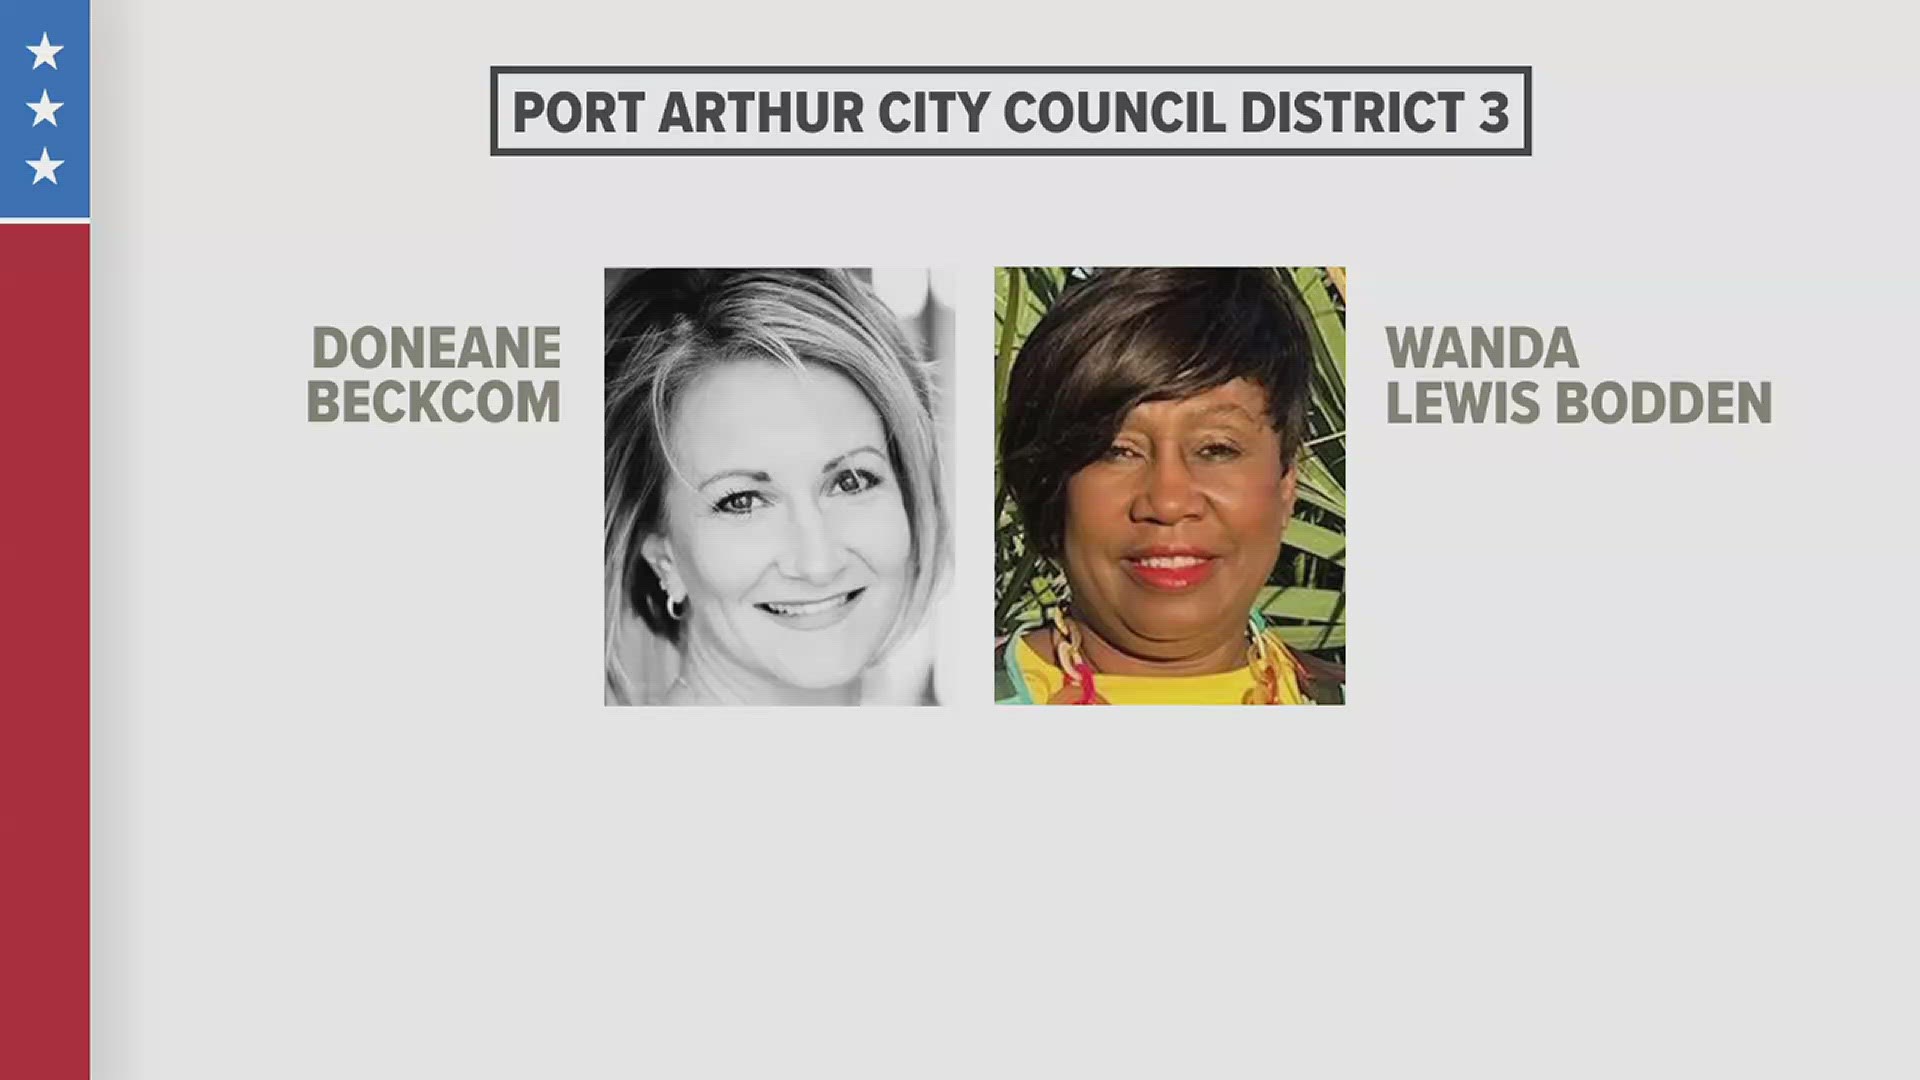 Early voting in Port Arthur runs from June 12 through June 20.